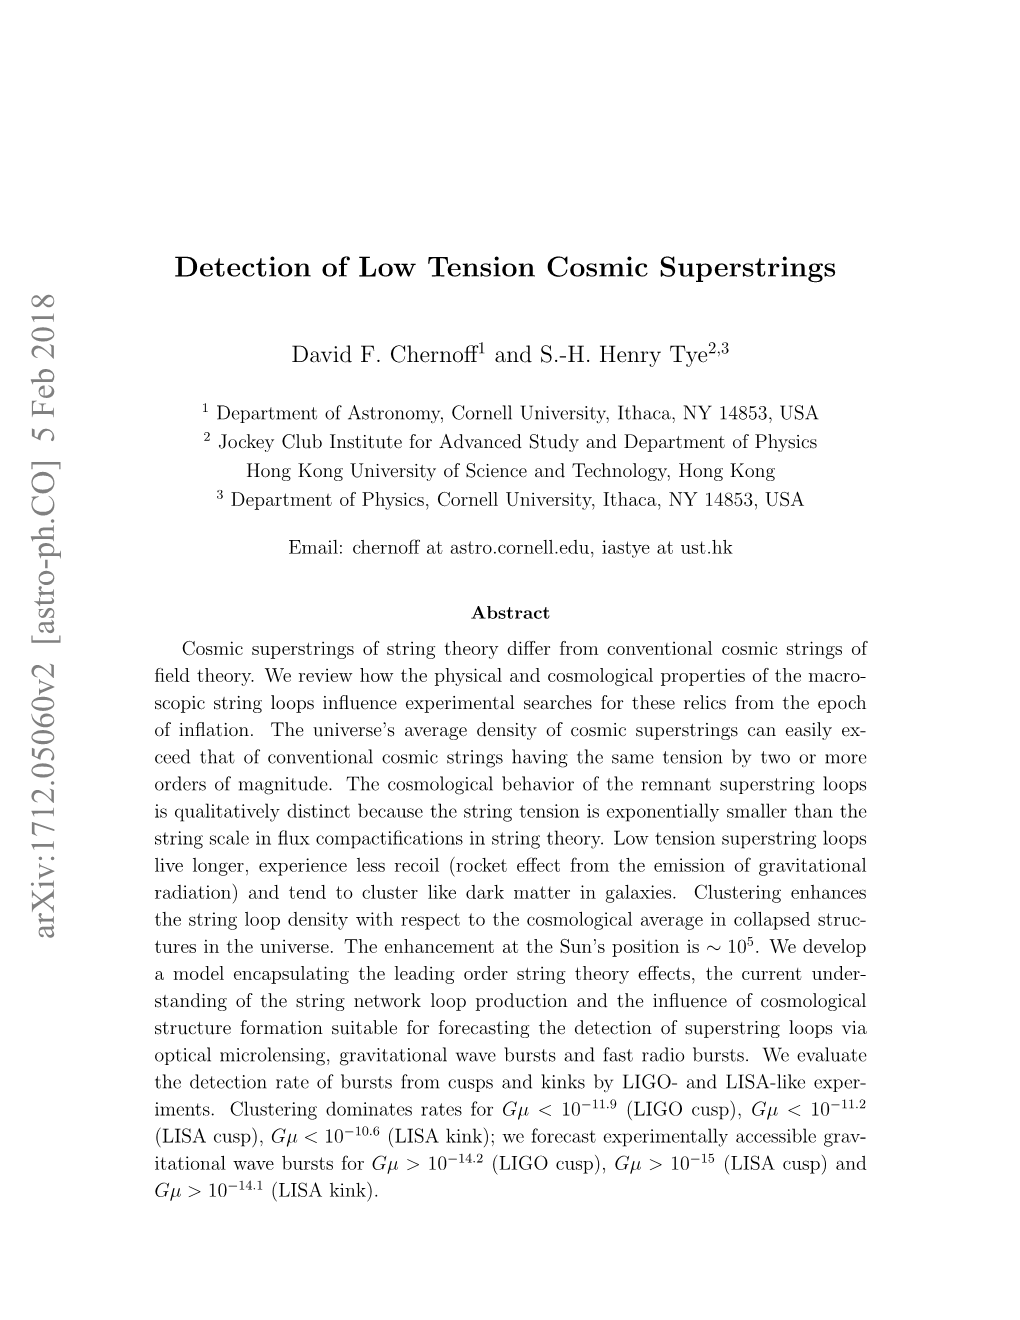 Detection of Low Tension Cosmic Superstrings